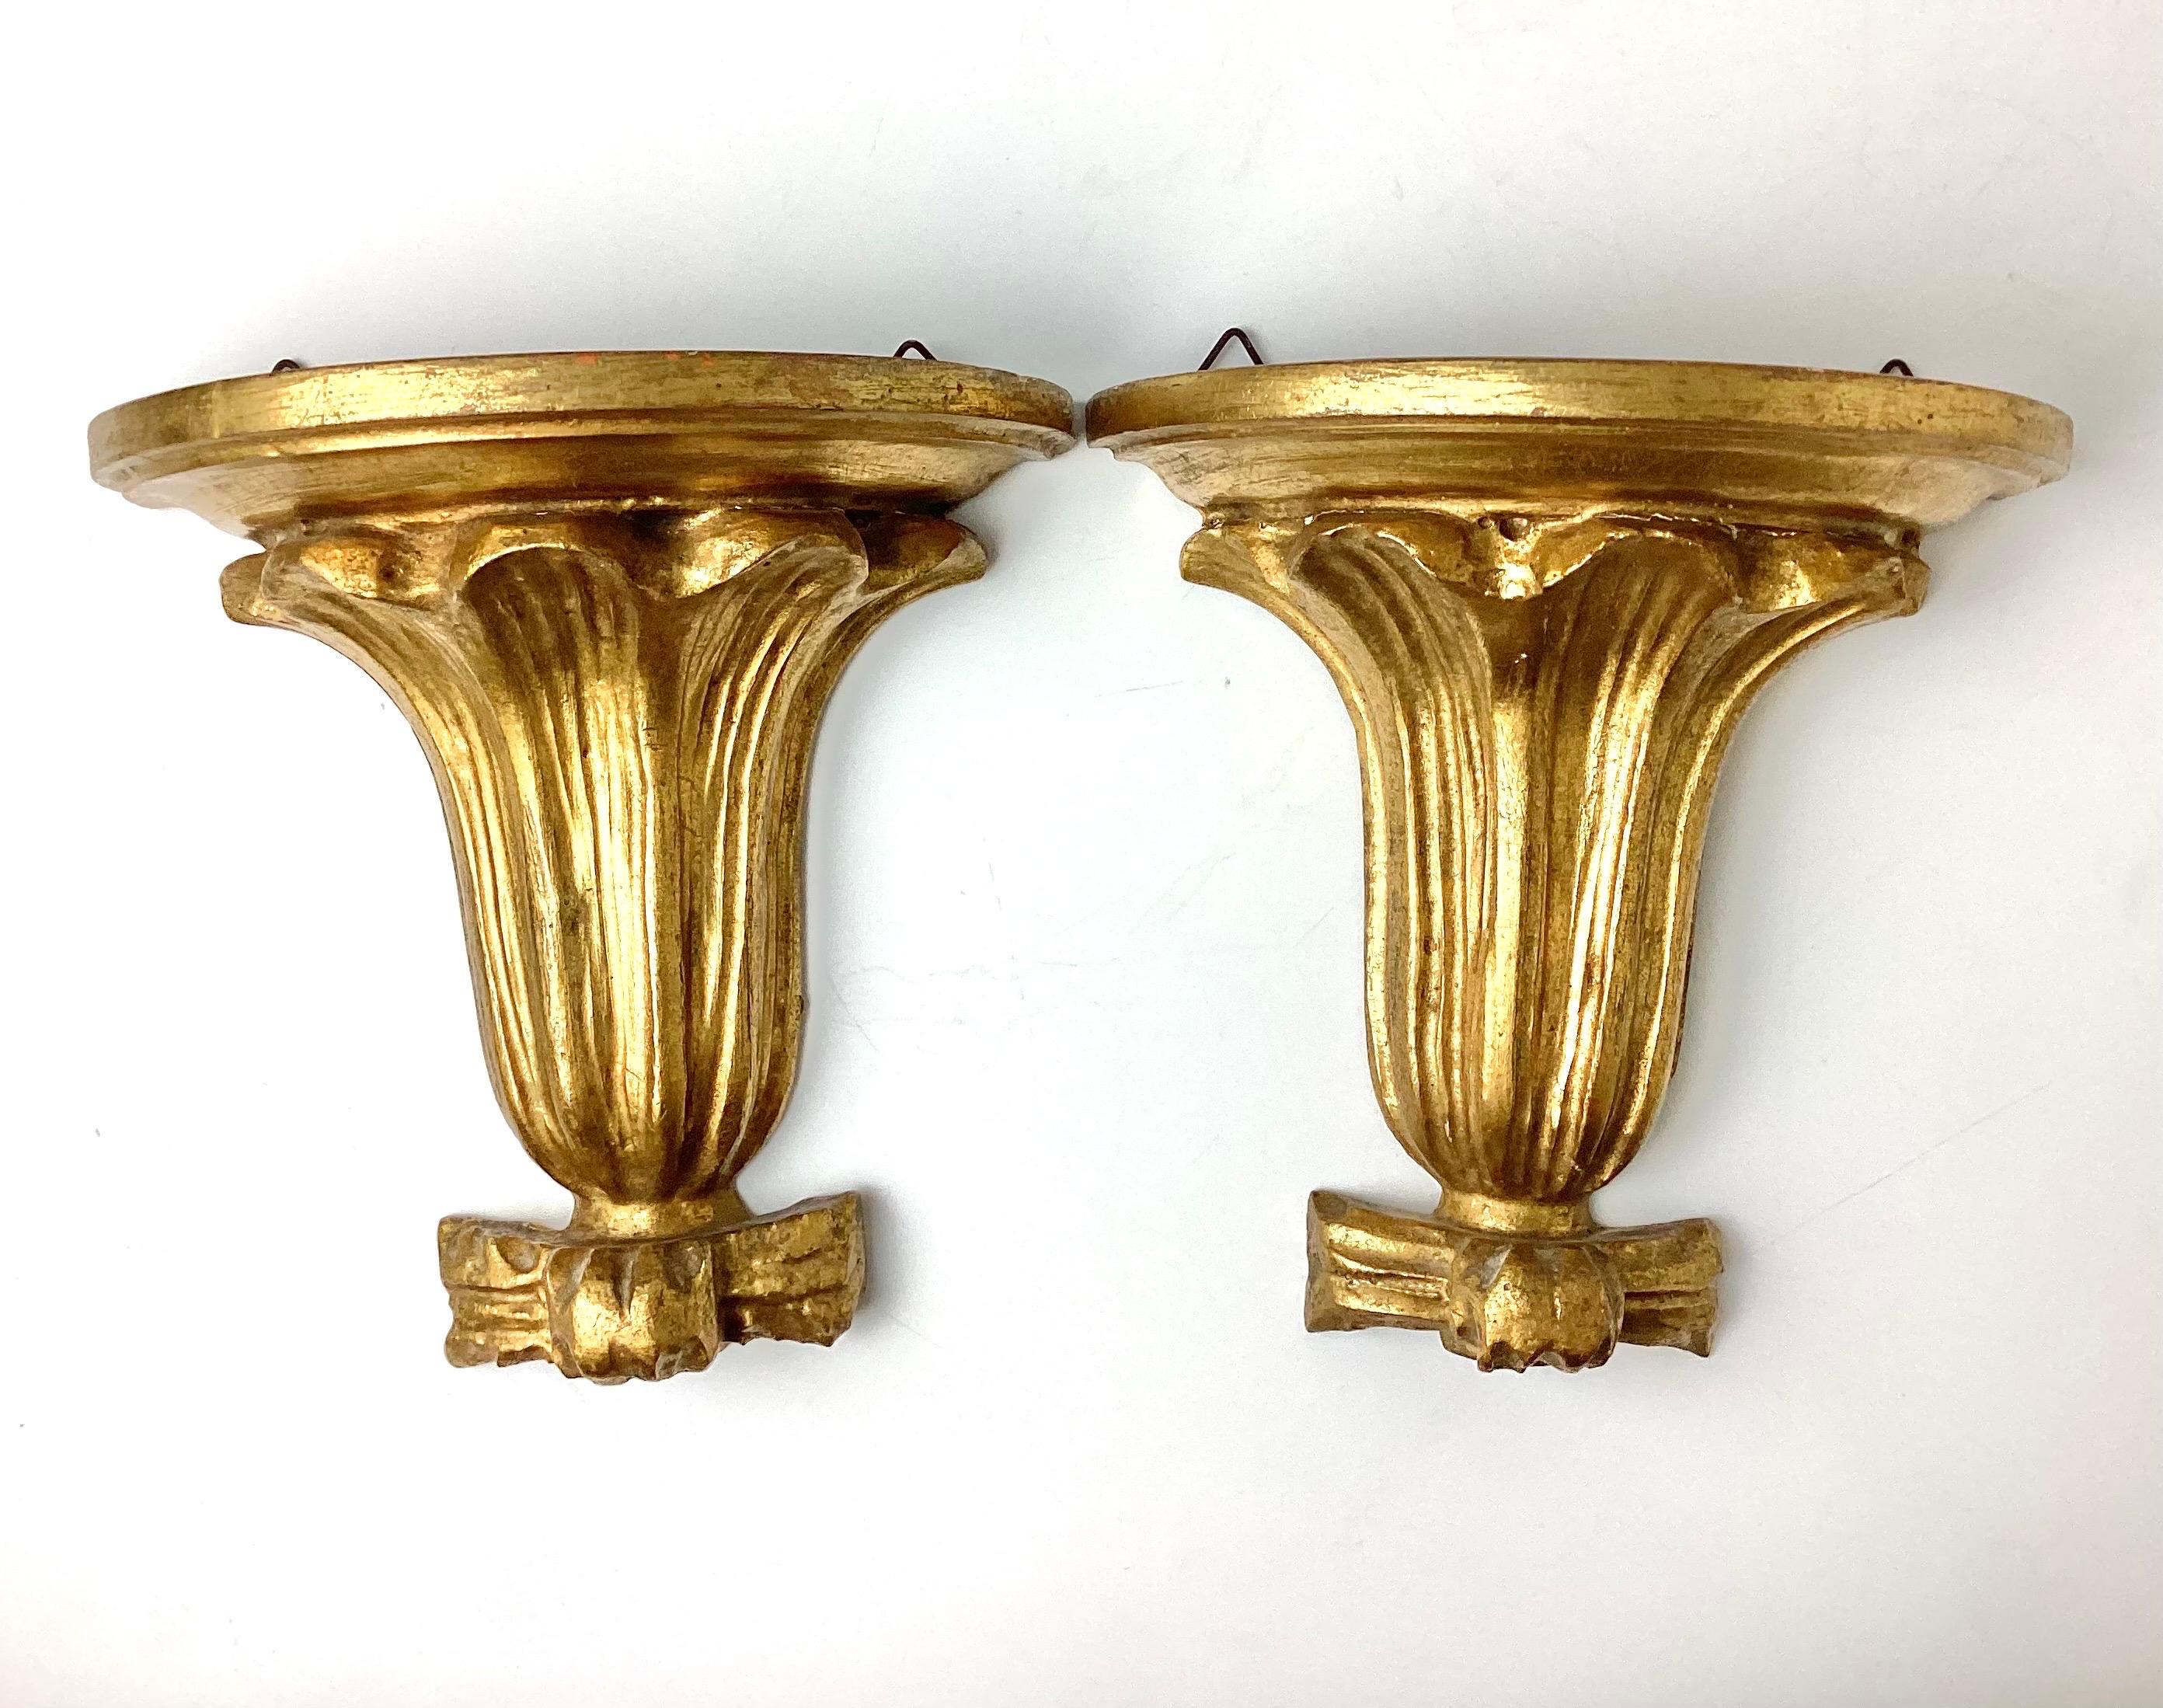 A beautiful pair of small Italian gold gilt wall shelf bracket with bow motif and acanthus leaf design, circa mid-20th century, Italy. Hand carved and finished with gold gilt over plaster and wood. Hard to read but marked made in Italy and the